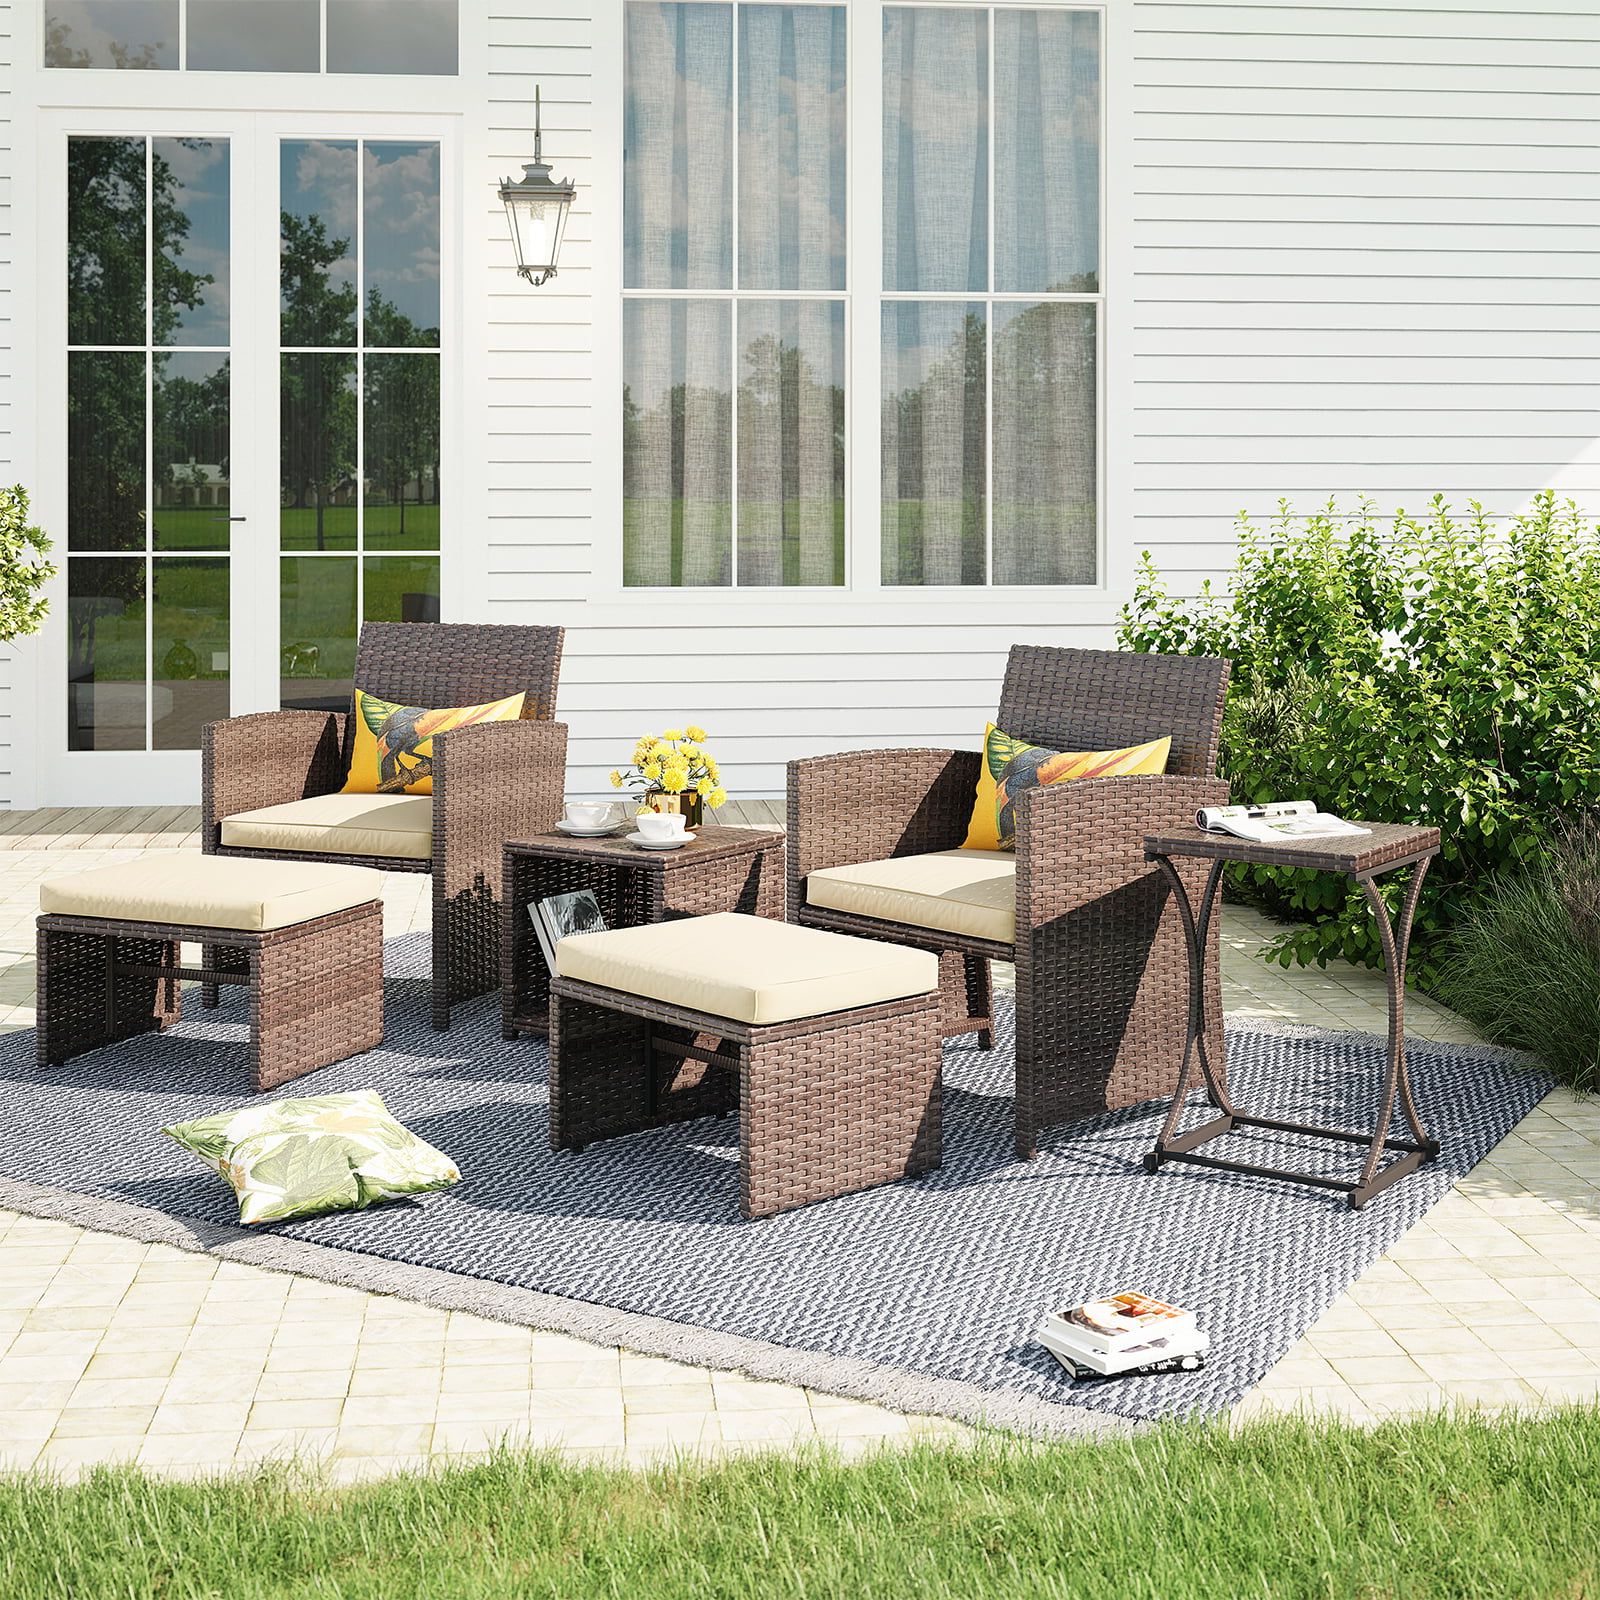 Brown Wicker Chairs With Ottoman Within Recent Oc Orange Casual 6 Piece Patio Wicker Furniture Set, Rattan Outdoor Chairs,  With Beige Cushioned Ottoman, Resin Nesting Table, Modern Design, Brown –  Walmart (View 14 of 15)